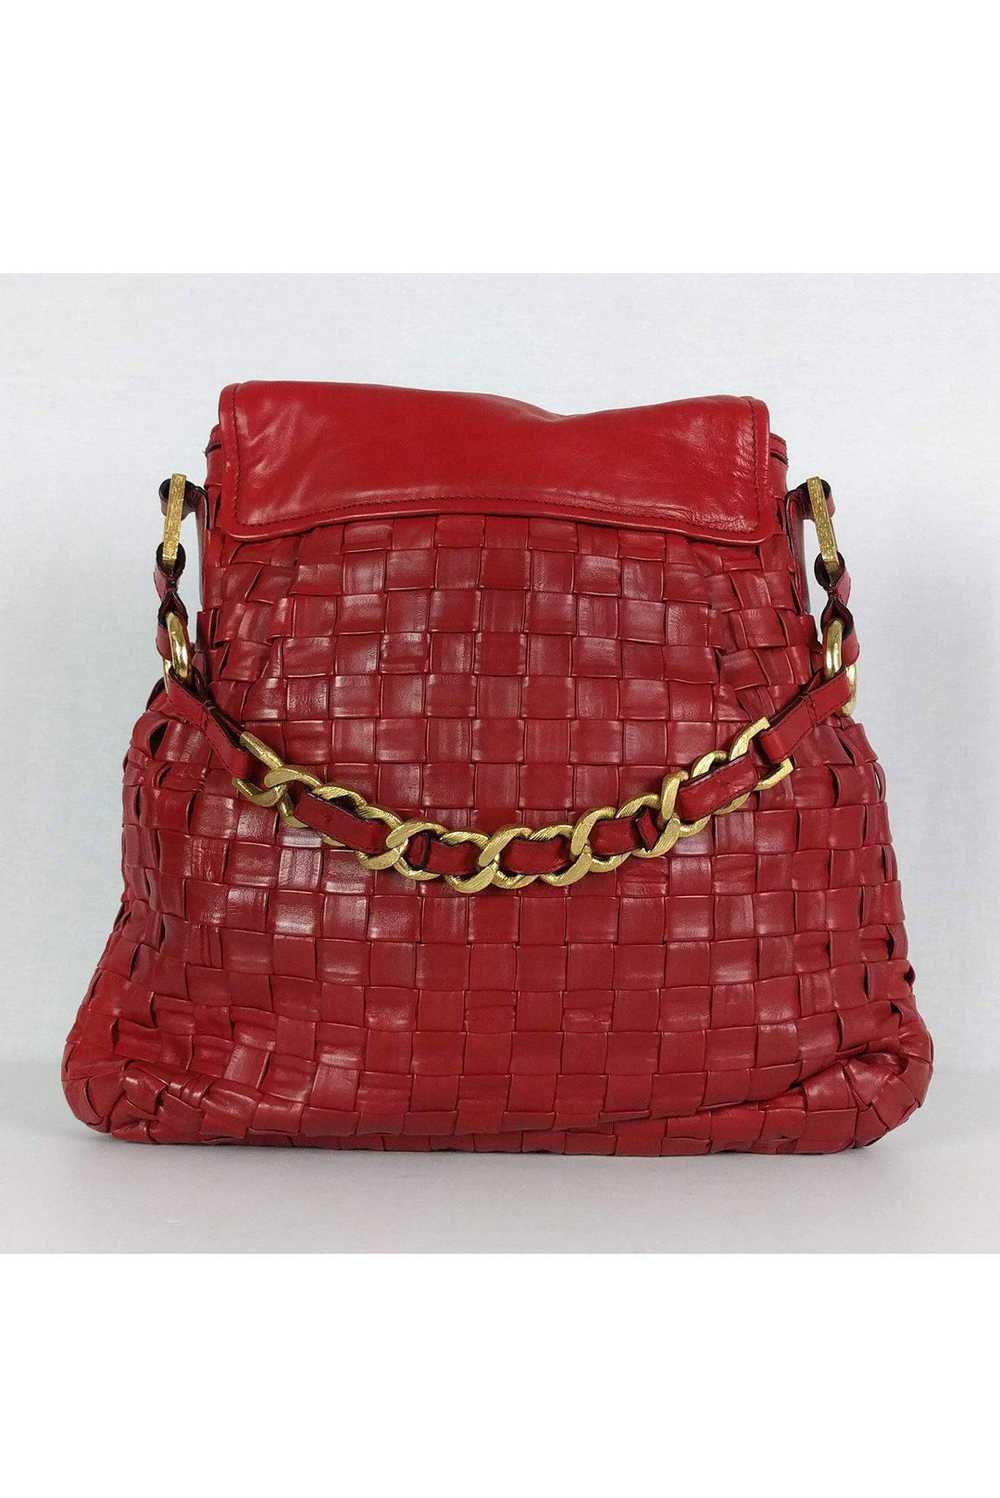 Marc Jacobs - Red Leather Elsa Woven Bag - image 3